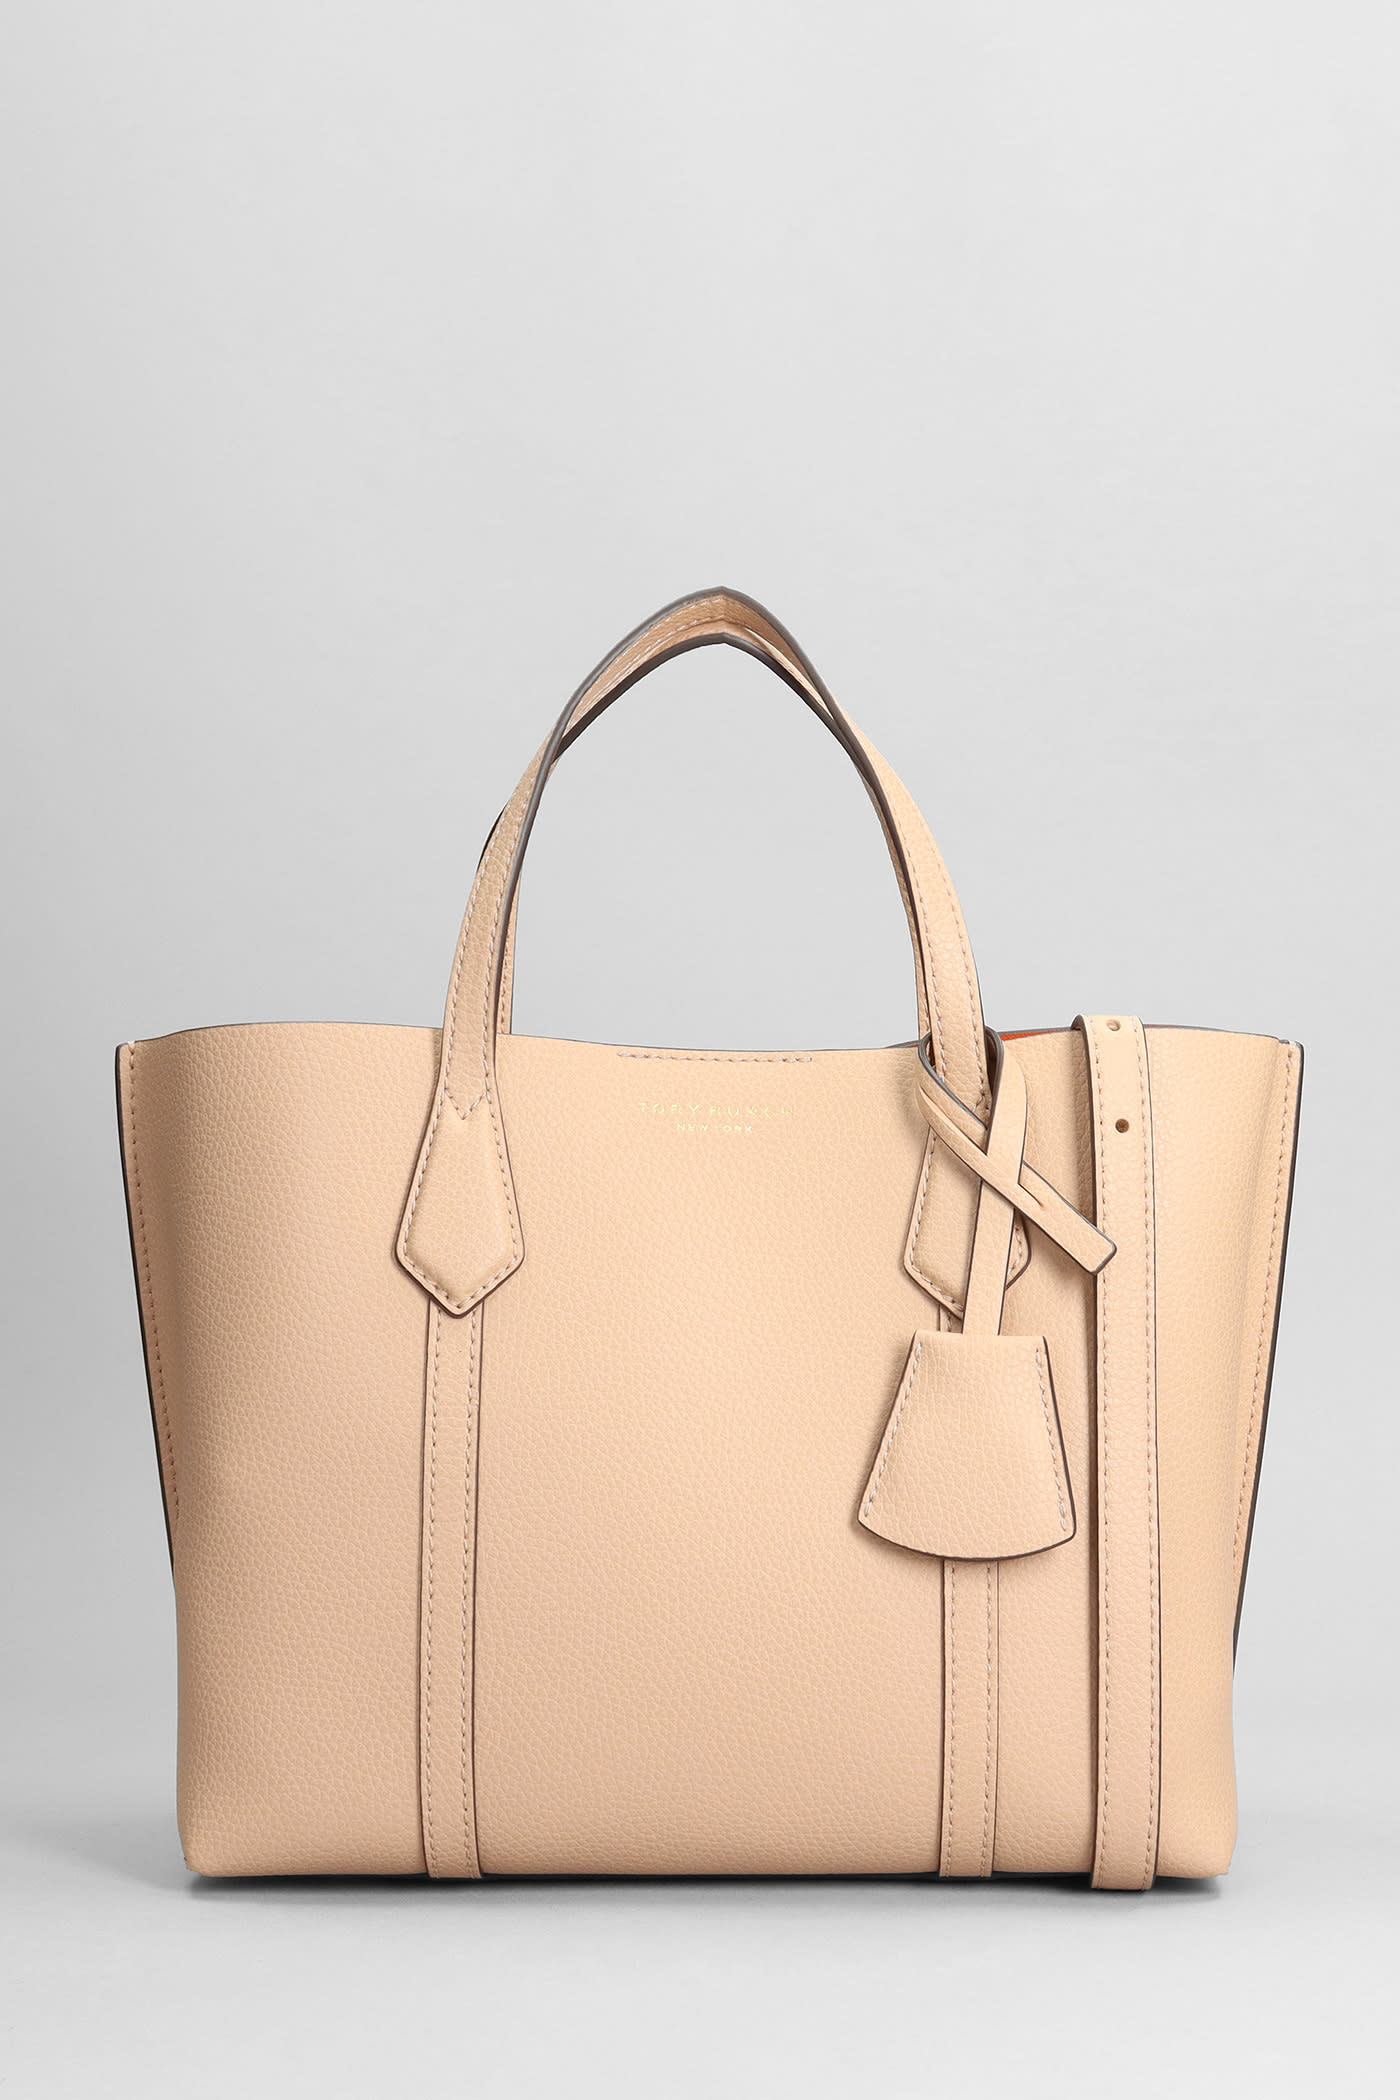 TORY BURCH PERRY TRIPLE TOTE IN BEIGE LEATHER